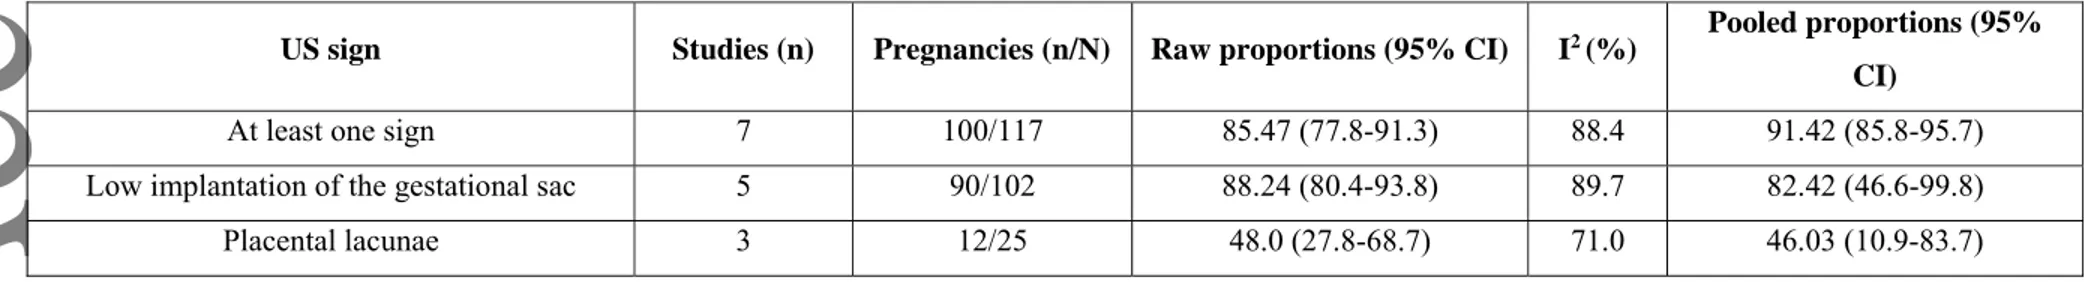 Table 2. Pooled proportions (PP) of the prevalence of the different first trimester ultrasound signs in women with AIP